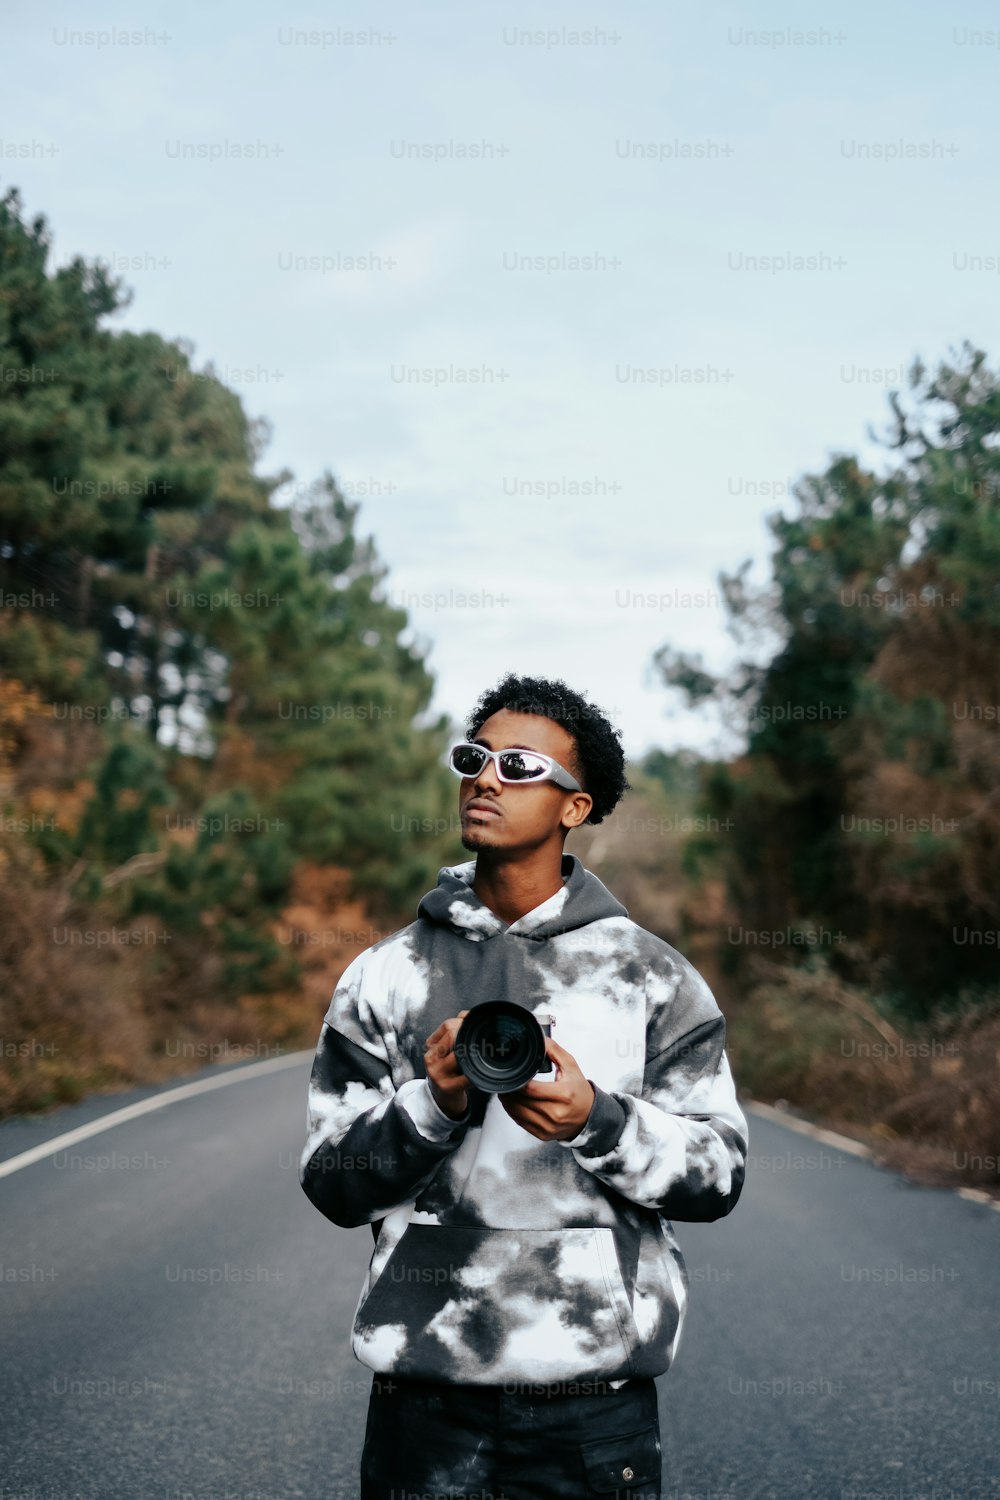 a man standing on the side of a road holding a camera